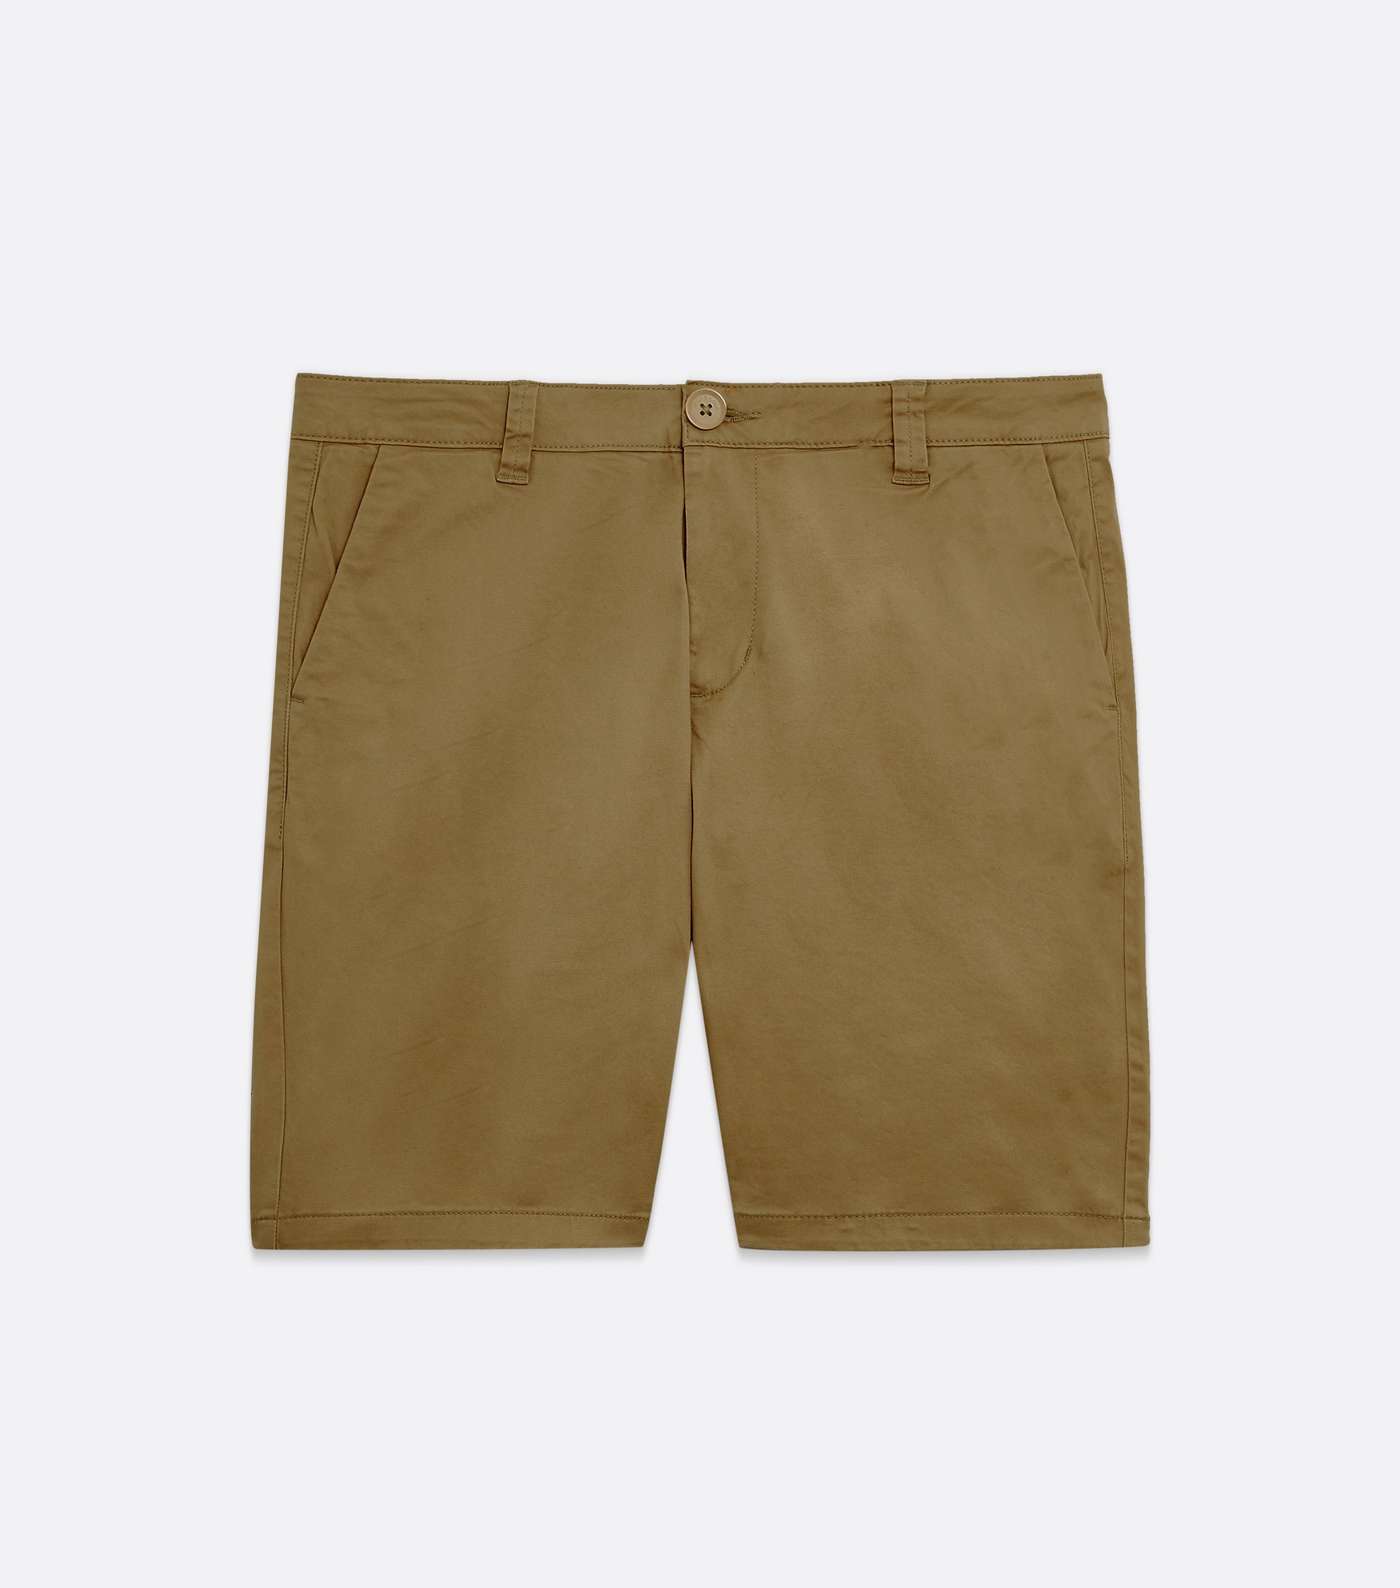 Only & Sons Tan Chino Shorts Image 5